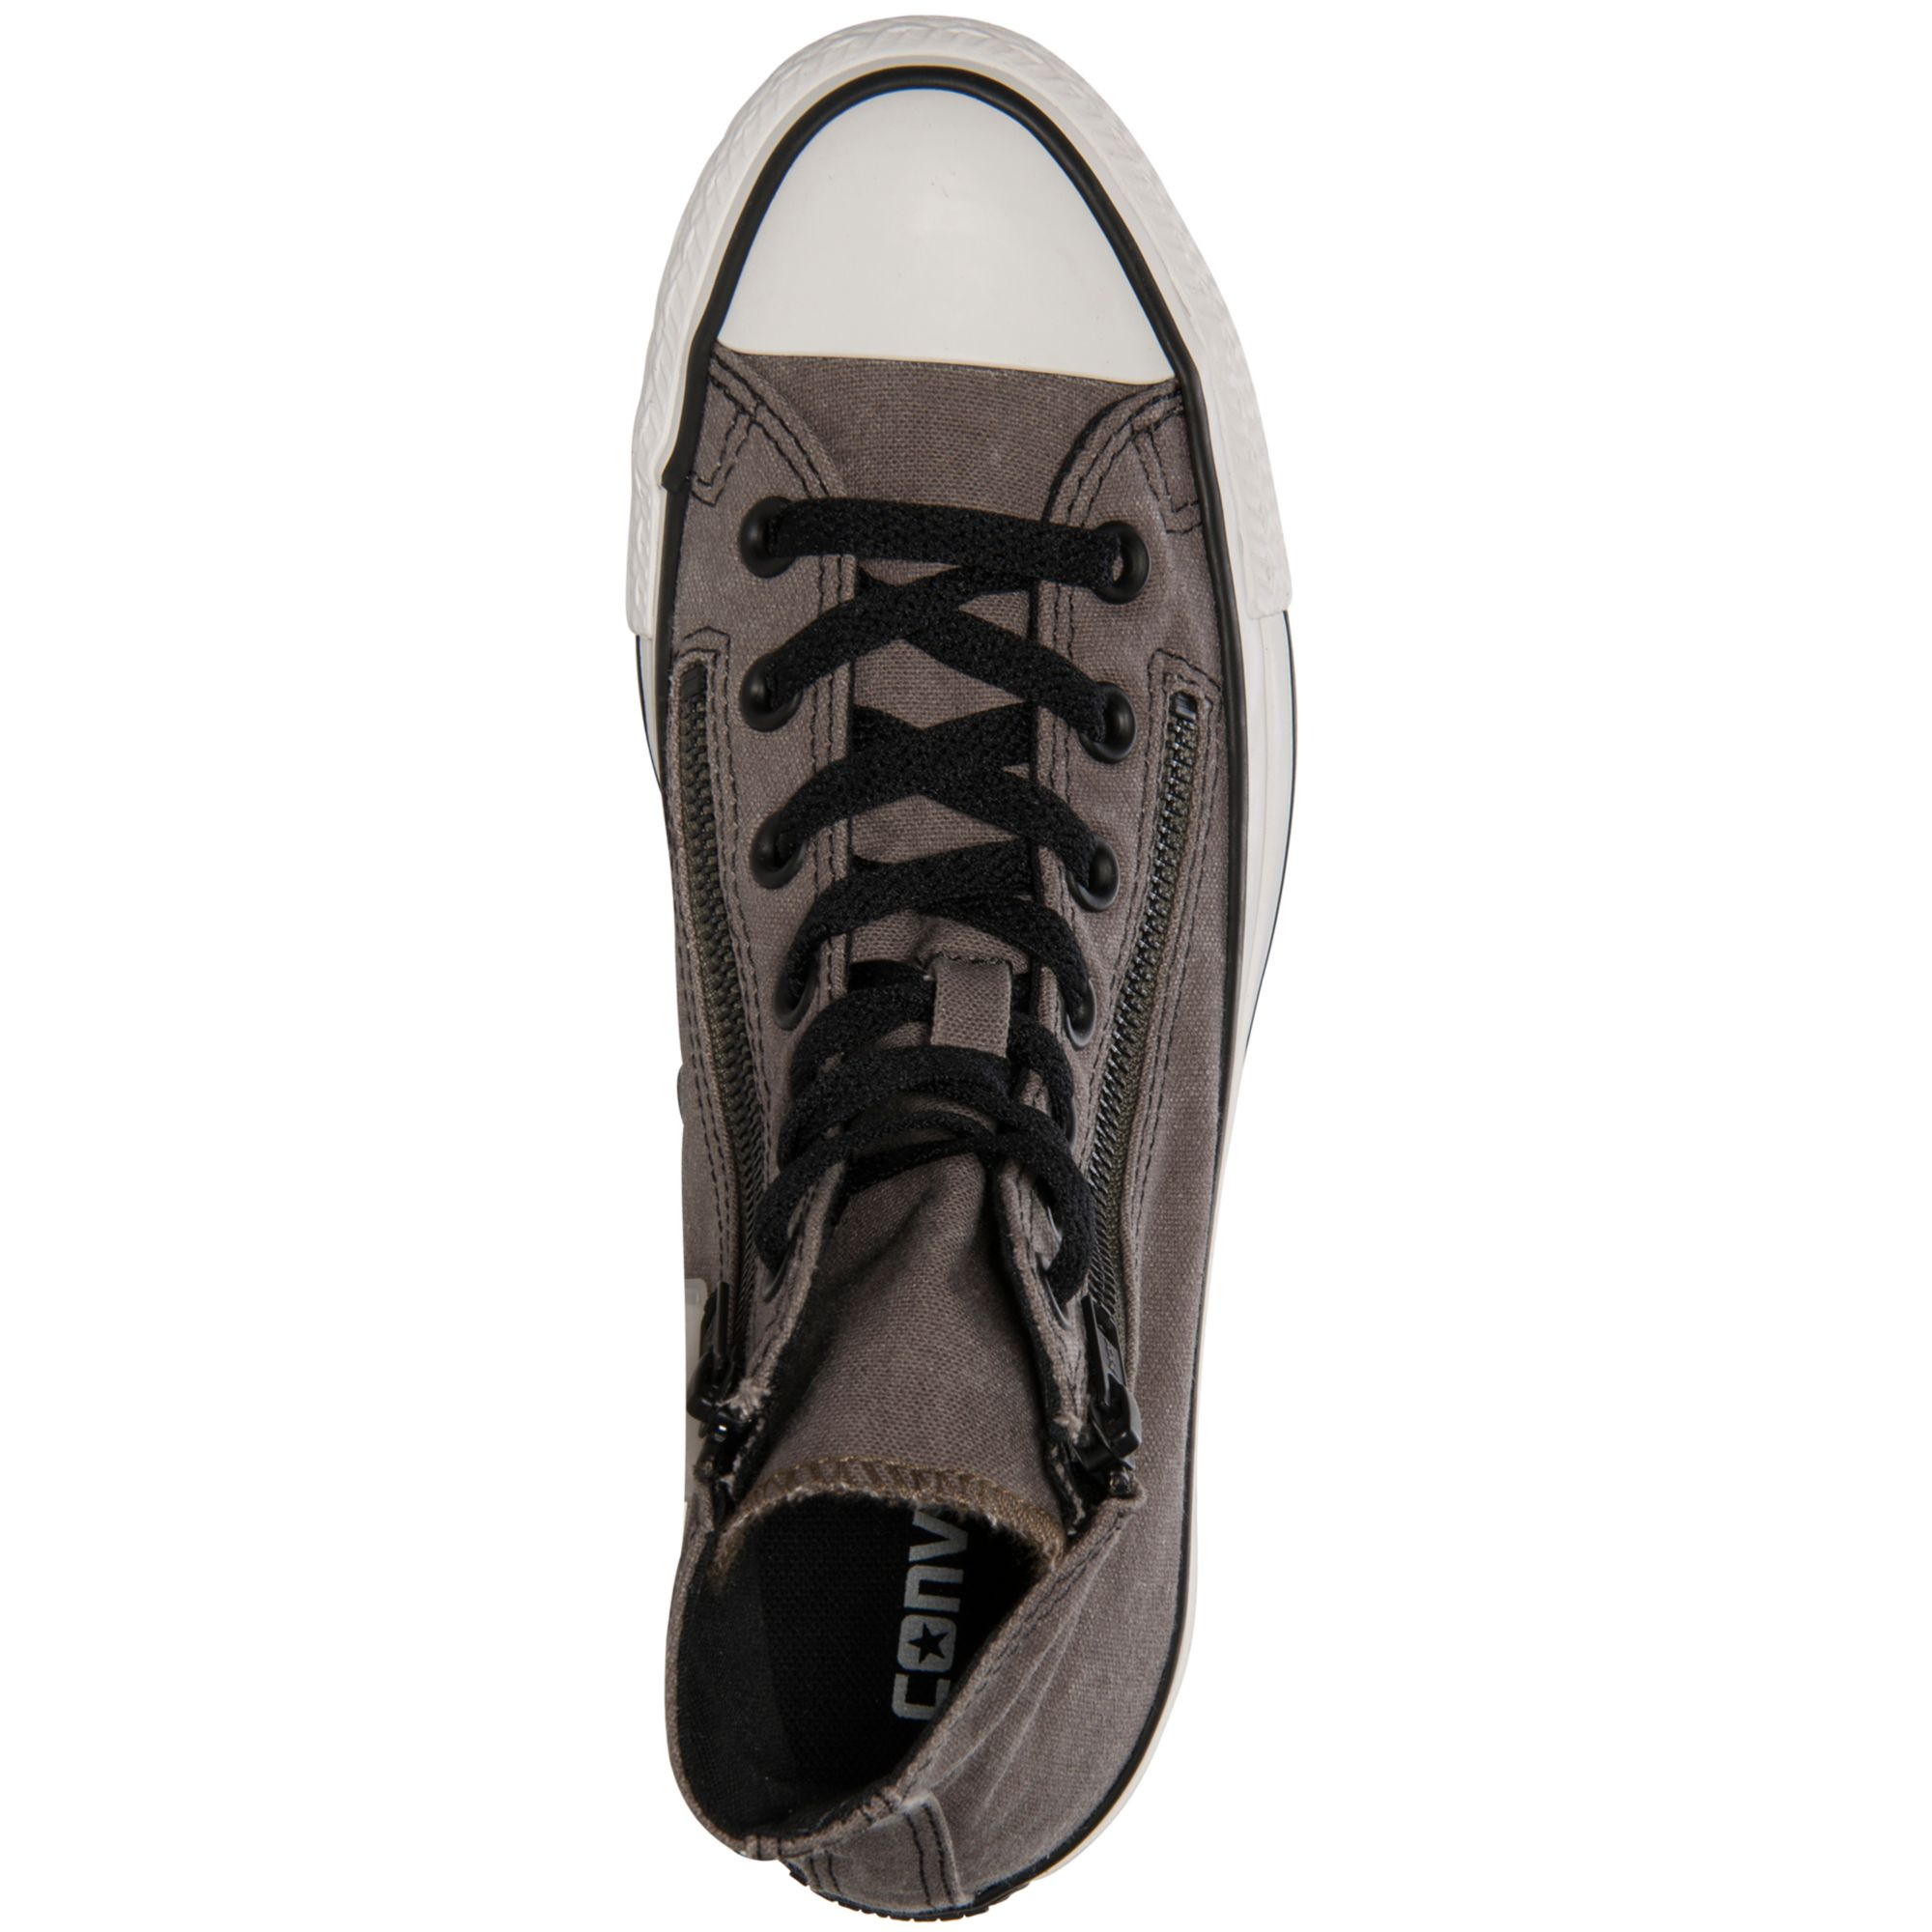 Converse Chuck Taylor All Star Double Zip Hi Casual Sneakers in Gray ...